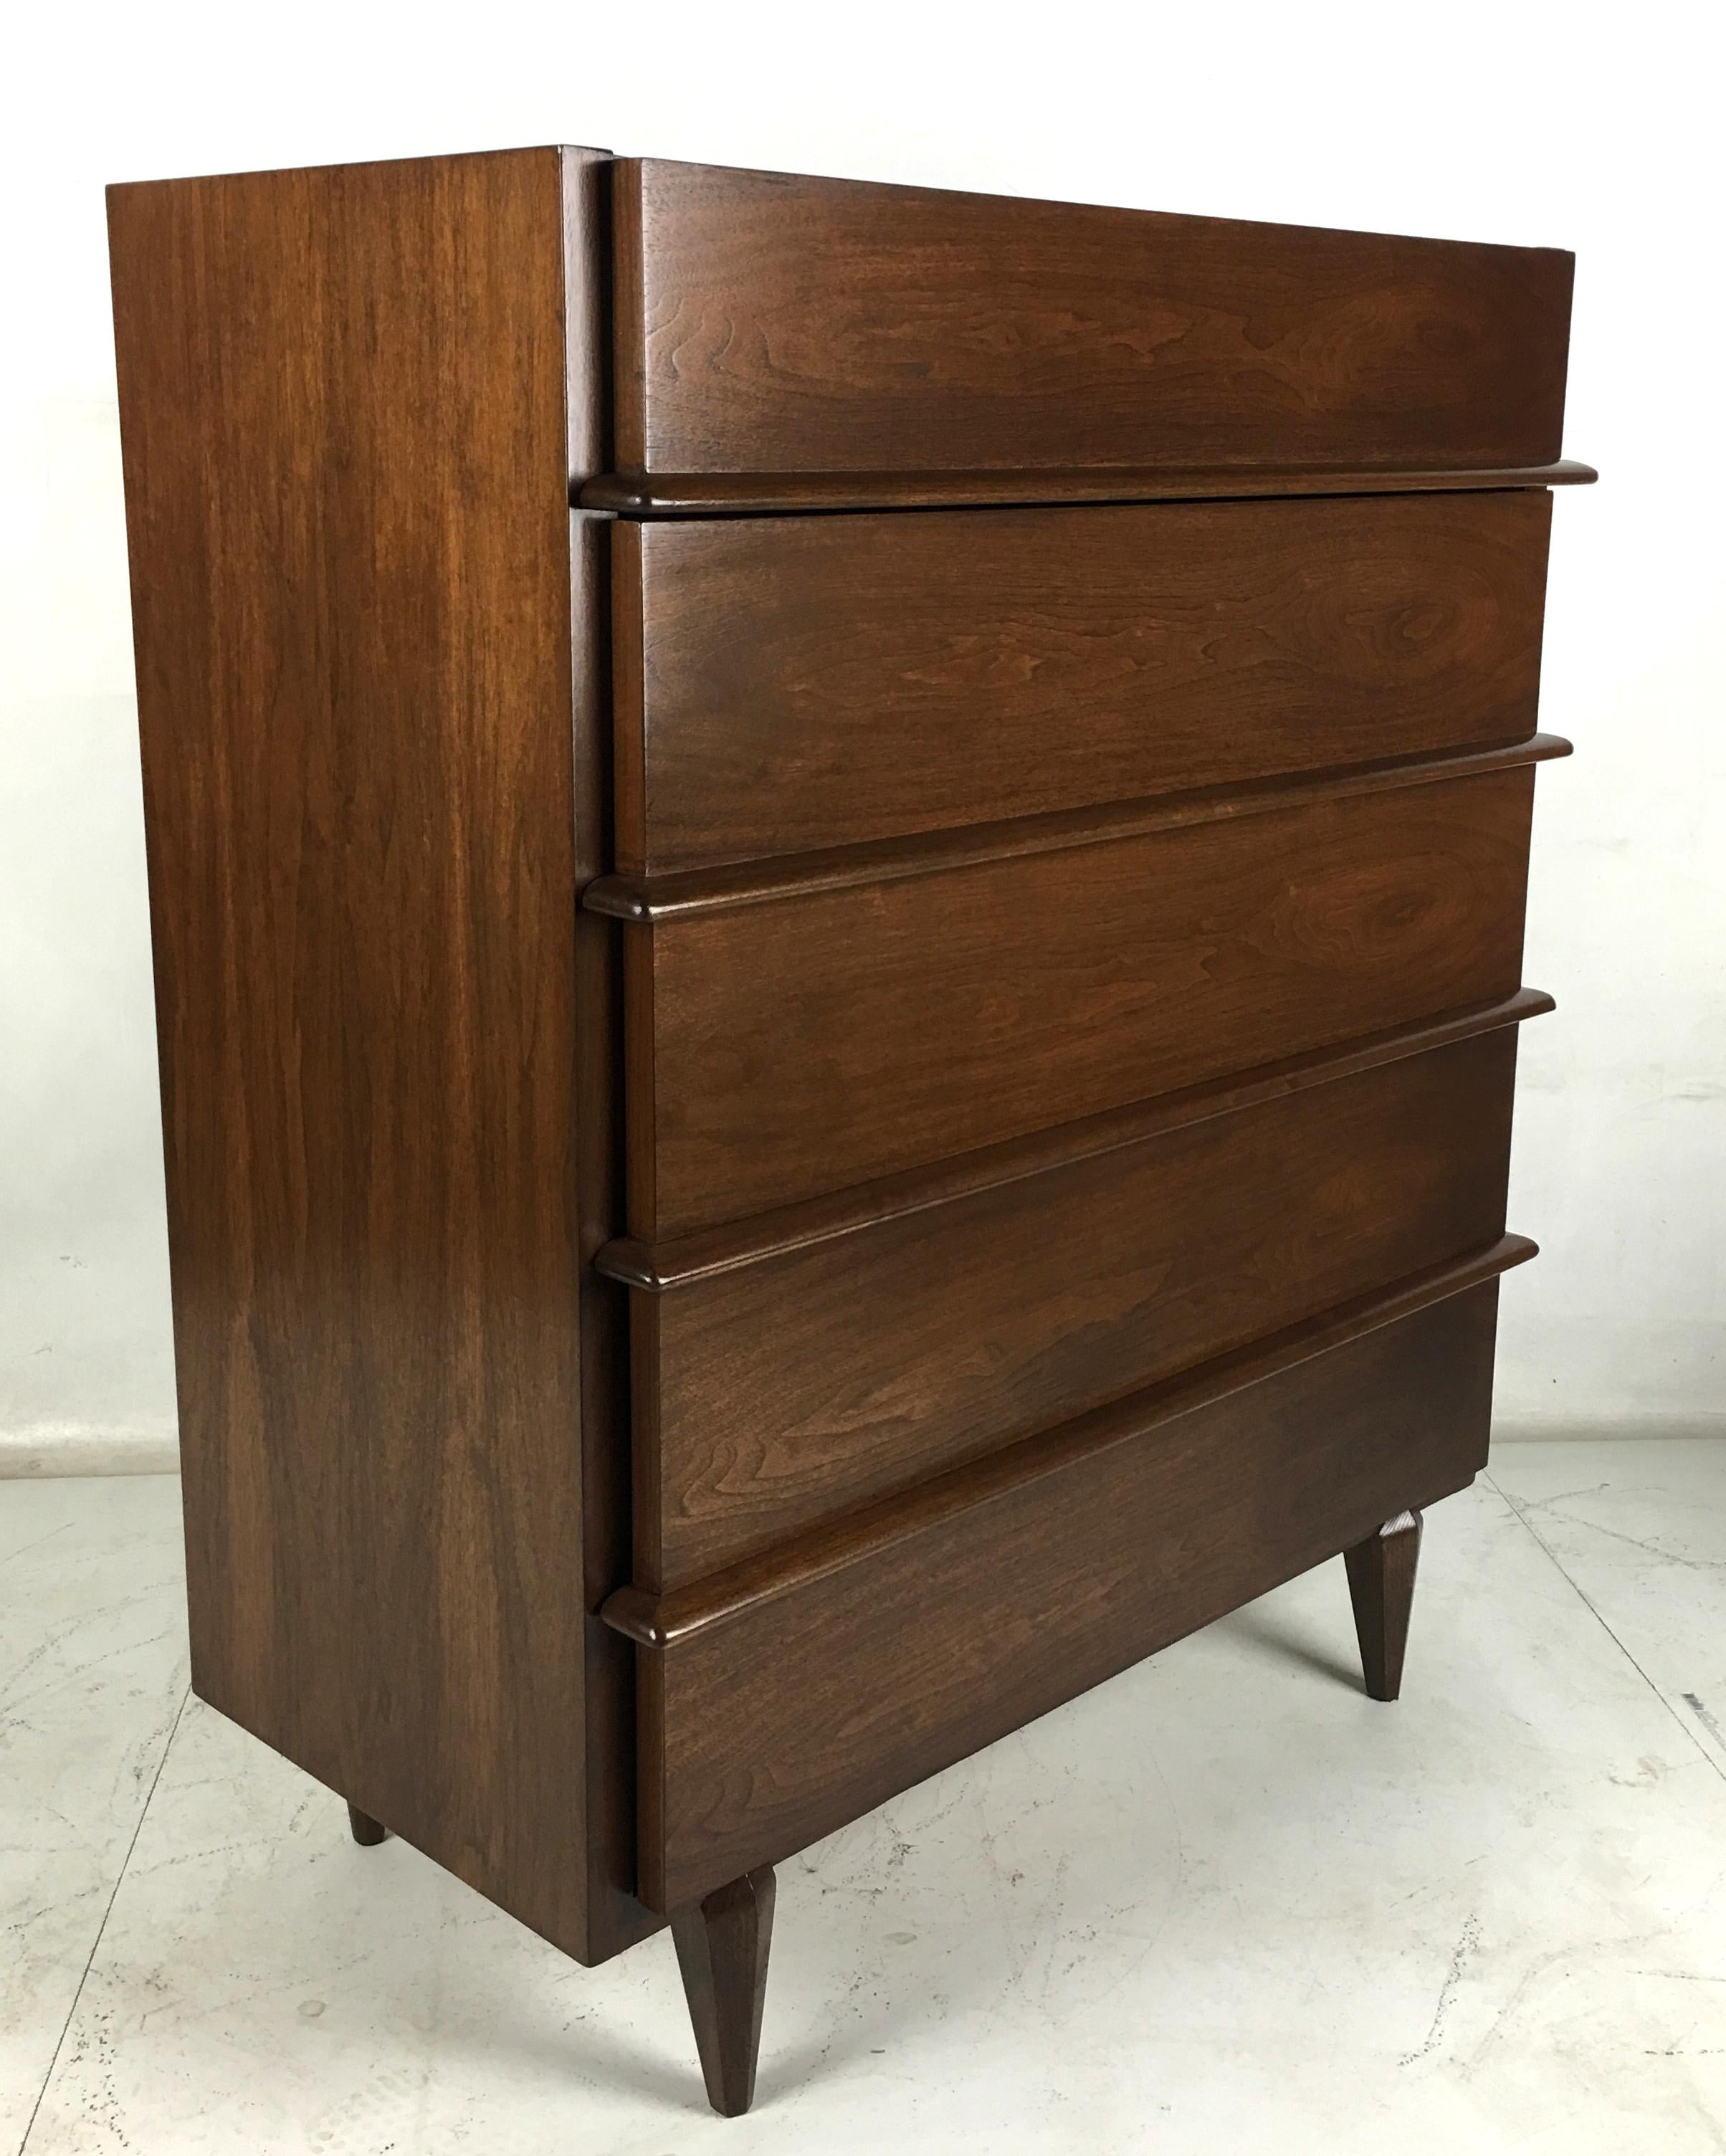 Walnut Highboy with full length sculpted drawer pulls by Merton Gershun. The drawers have beautiful graining and are given added dimension by the wraparound sculpted wood pulls.  The center-beveled, tapering legs are mounted forward of the apron,